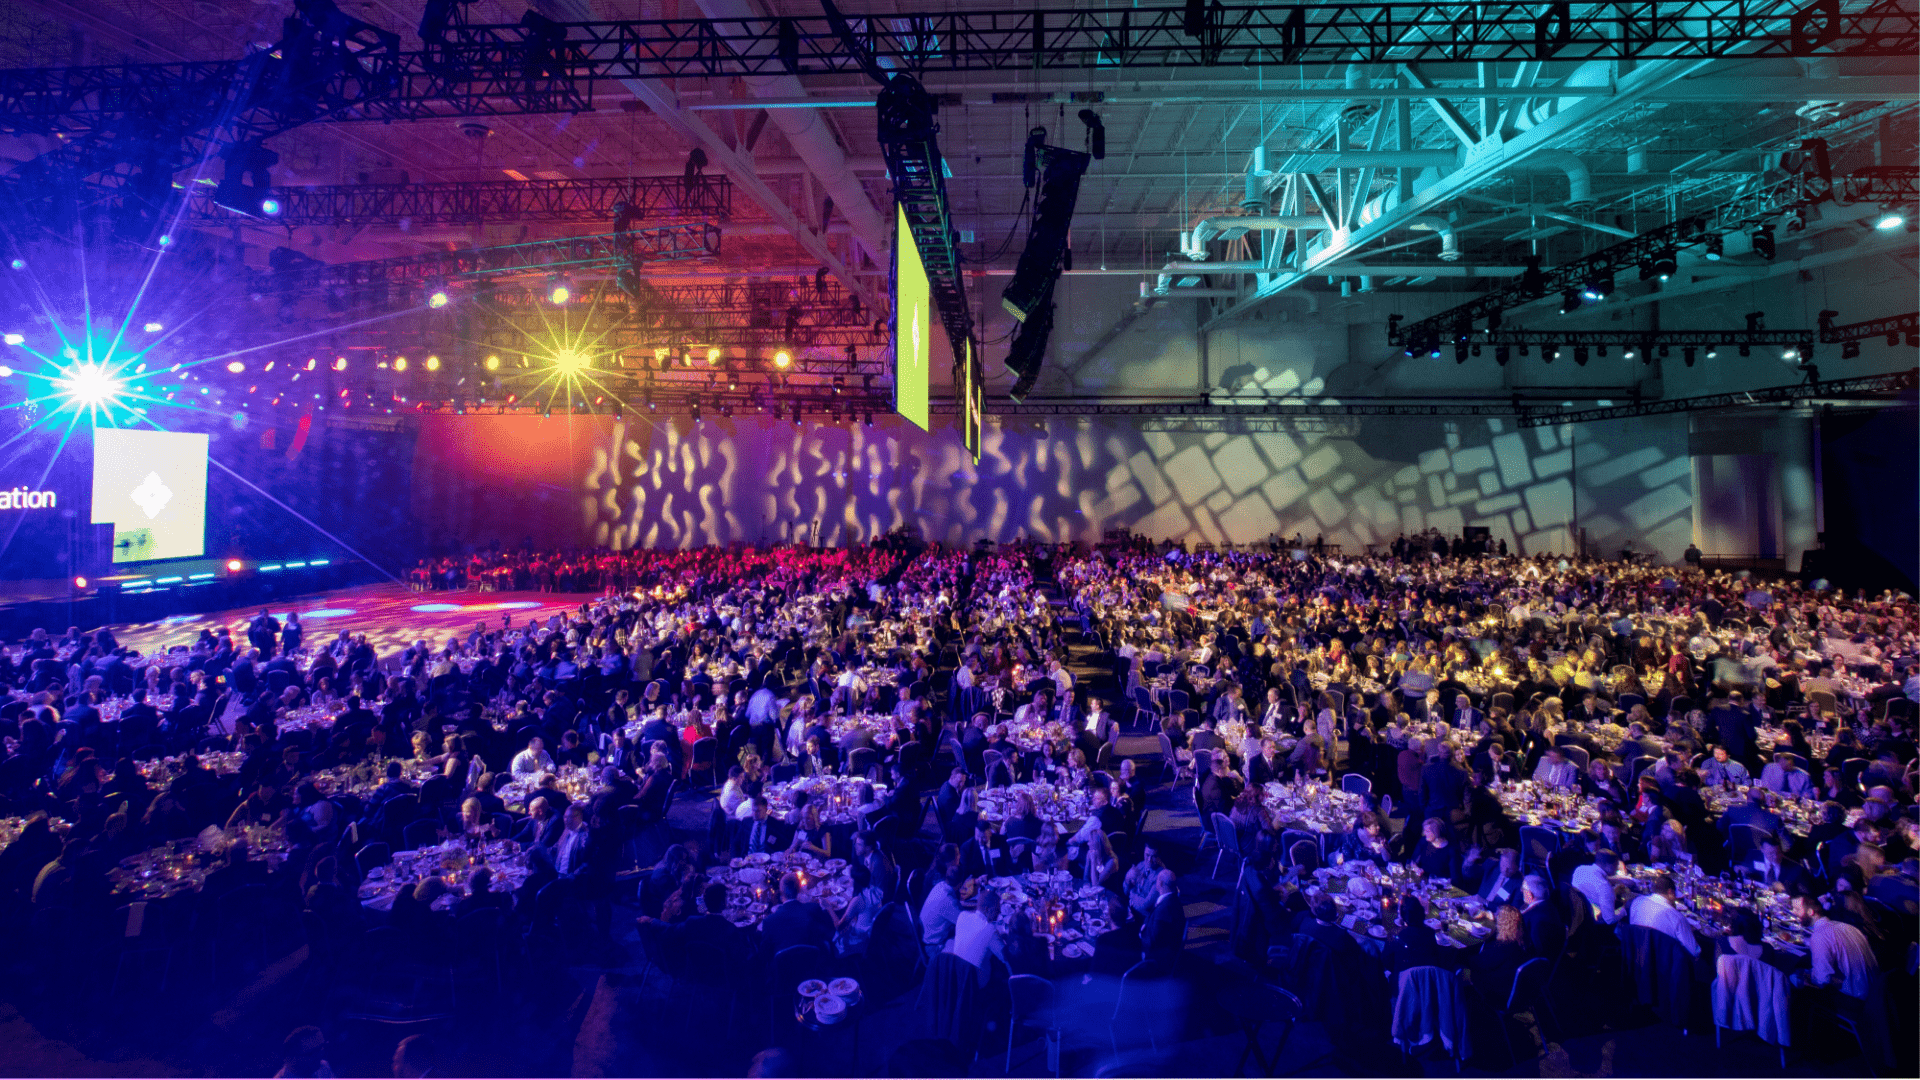 Large event space with creative lighting shining down on the attendees sitting at tables and looking at the stage